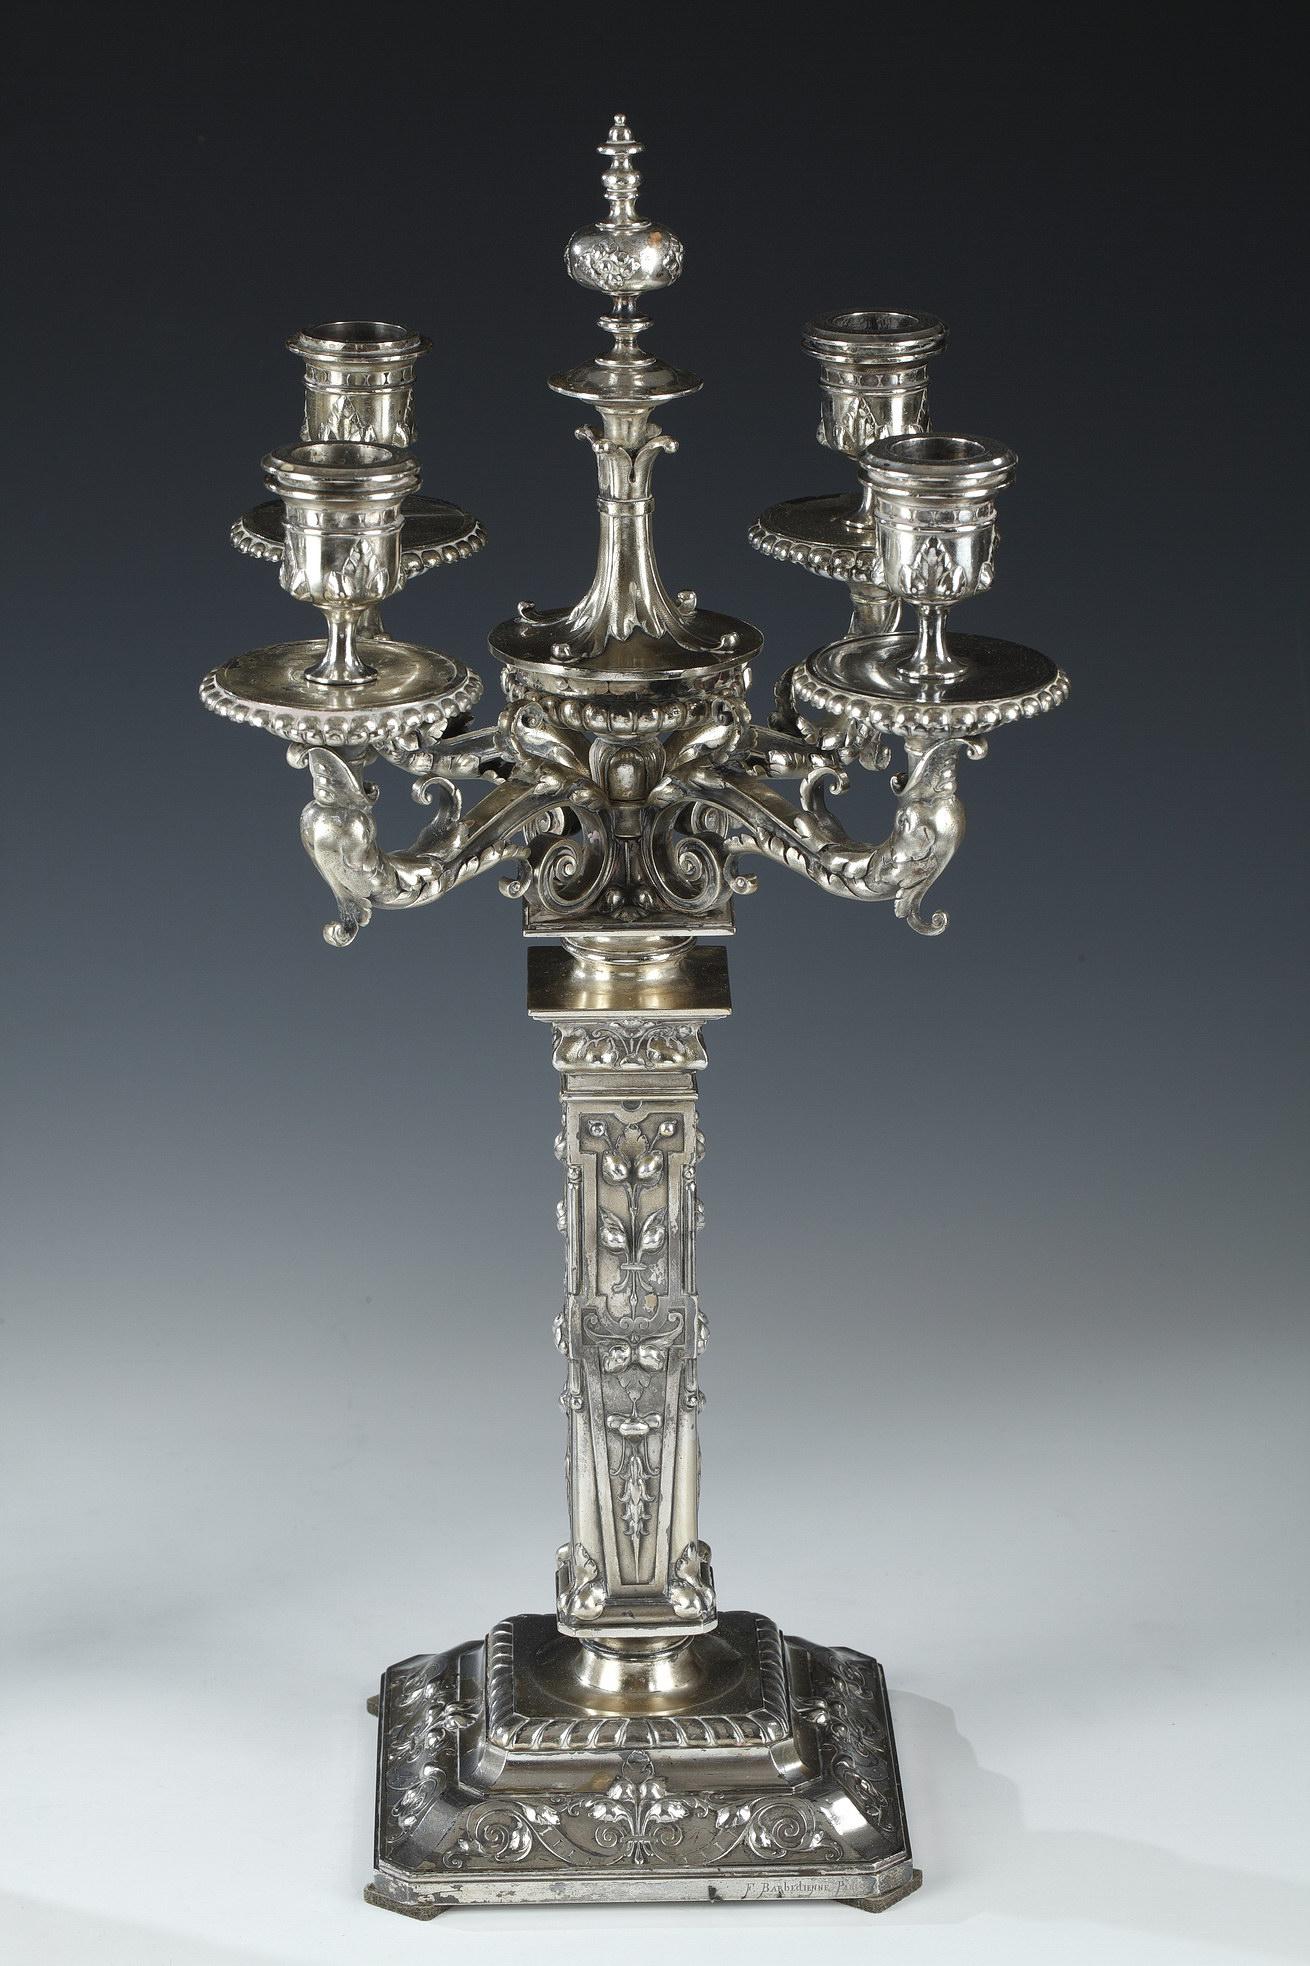 Silvered Pair of Candelabras by F. Barbedienne, L-C. Sevin and D. Attarge, France, 1869